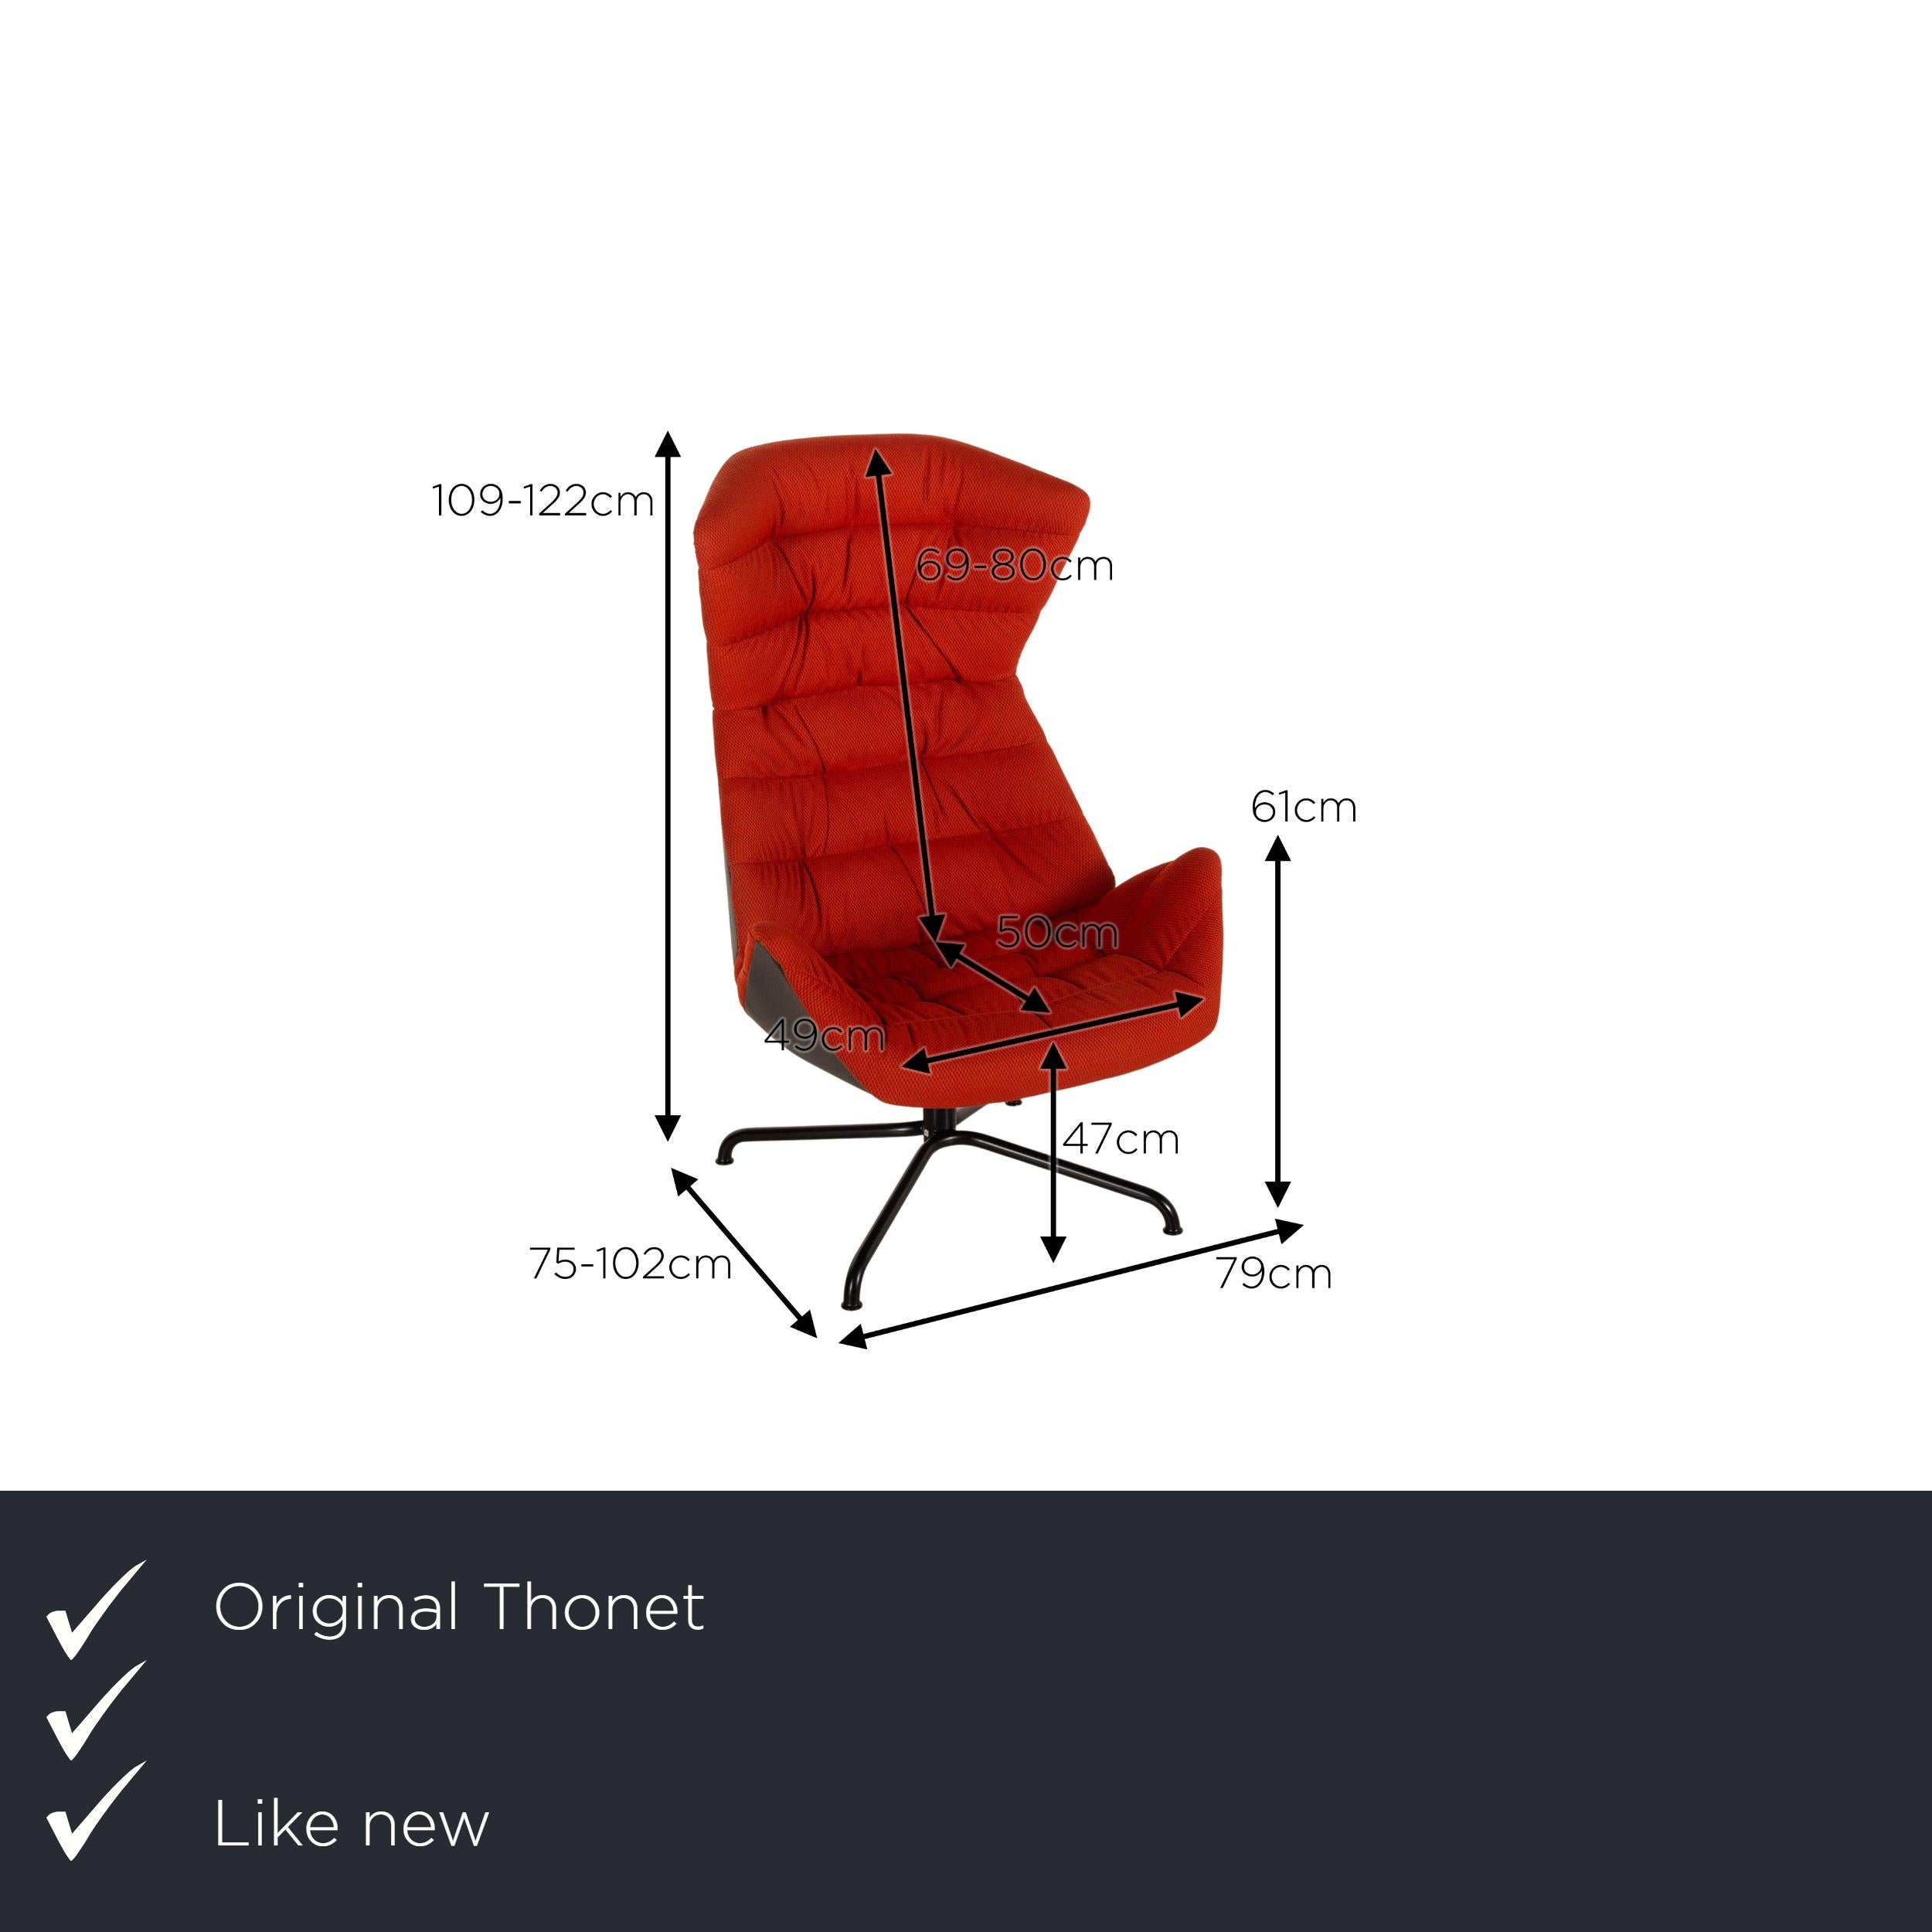 We present to you a Thonet 808 fabric armchair incl. Stool orange armchair function relax function.
 
 

 Product measurements in centimeters:
 

 depth: 75
 width: 79
 height: 122
 seat height: 47
 rest height: 61
 seat depth: 50
 seat